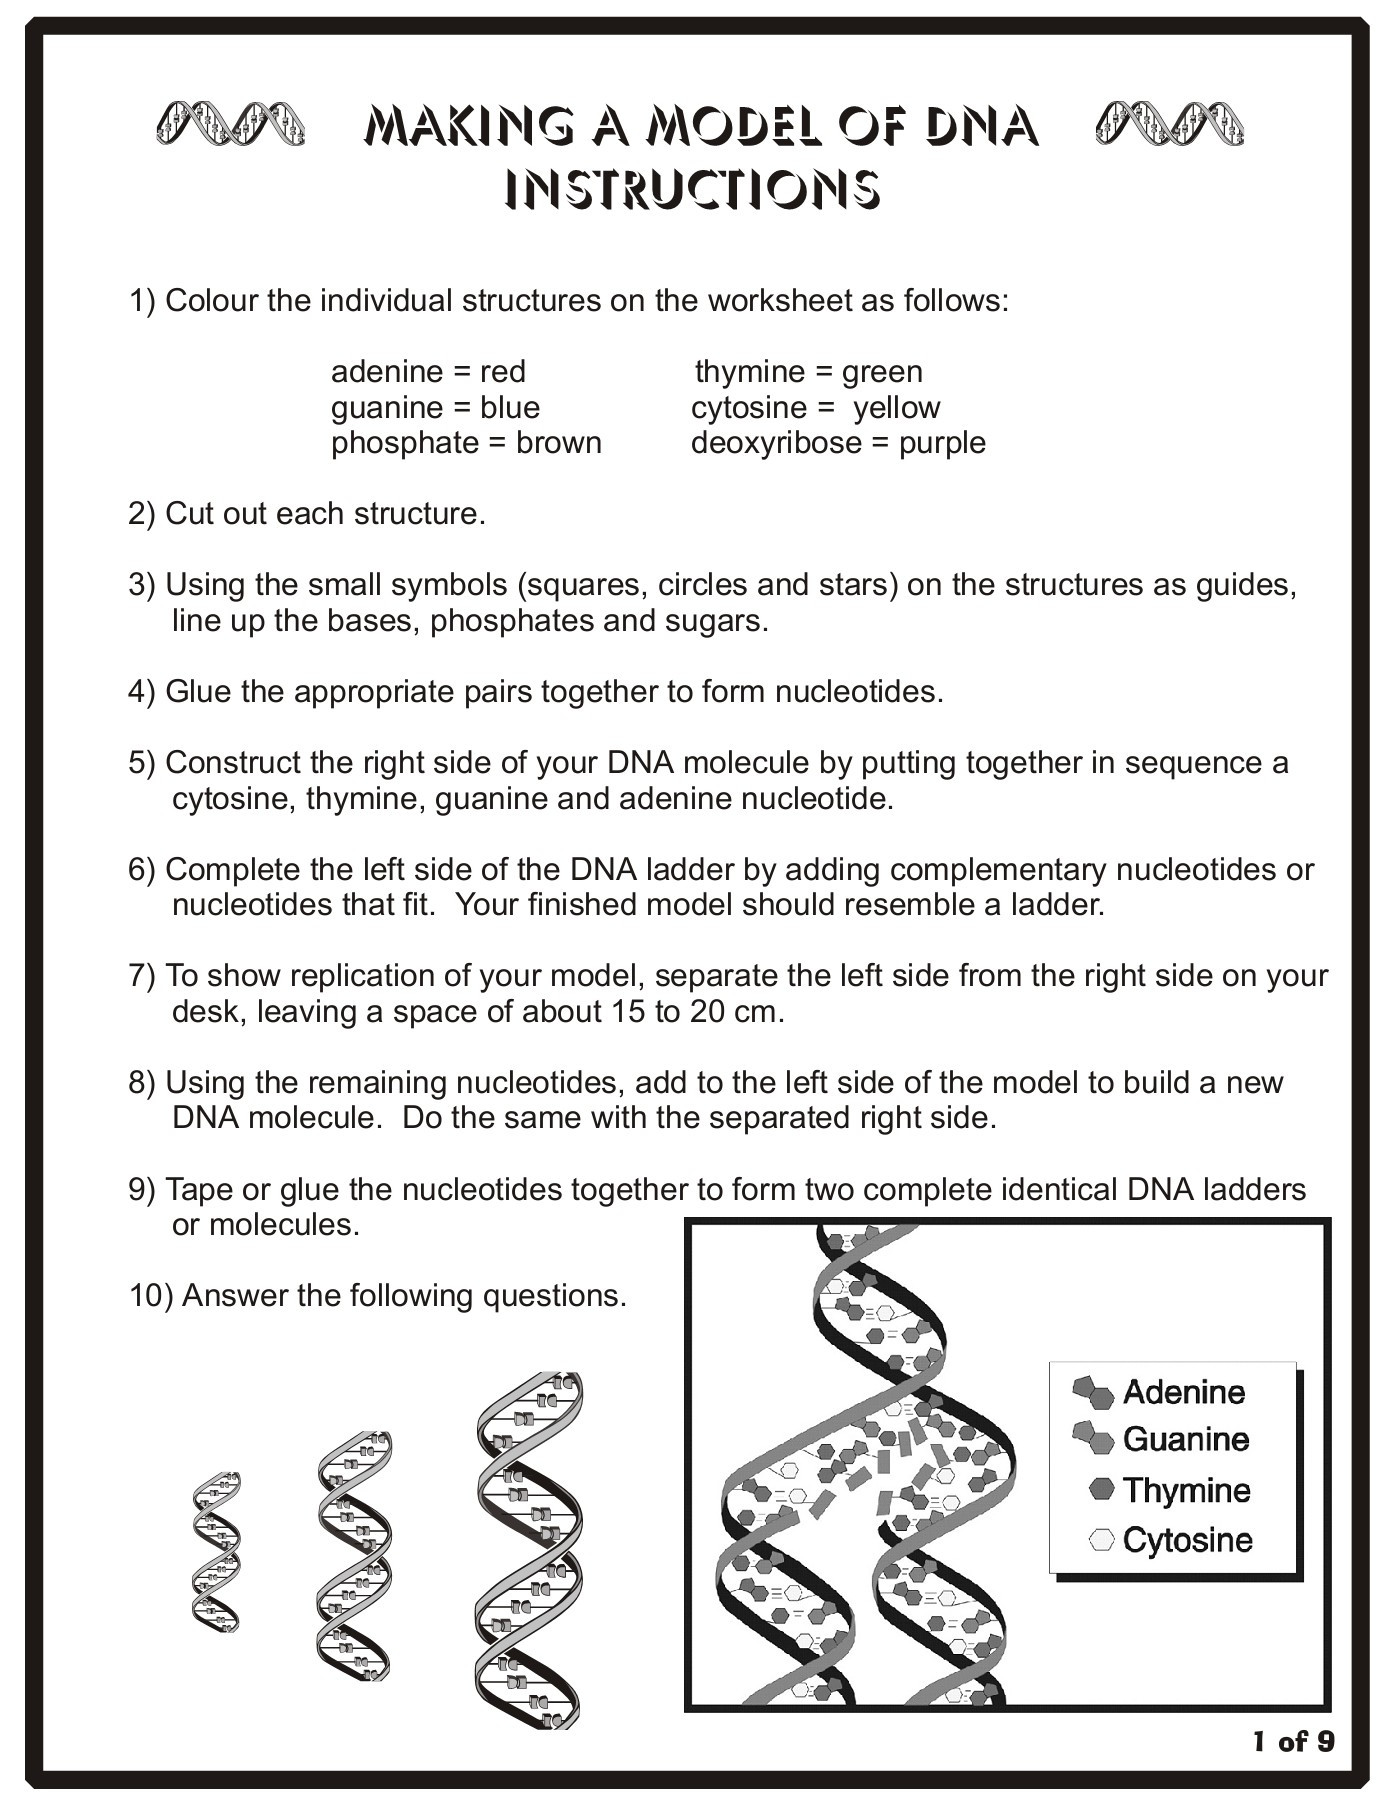 Dna Structure and Replication Worksheet Making A Model Of Dna Instructions TriPod Pages 1 9